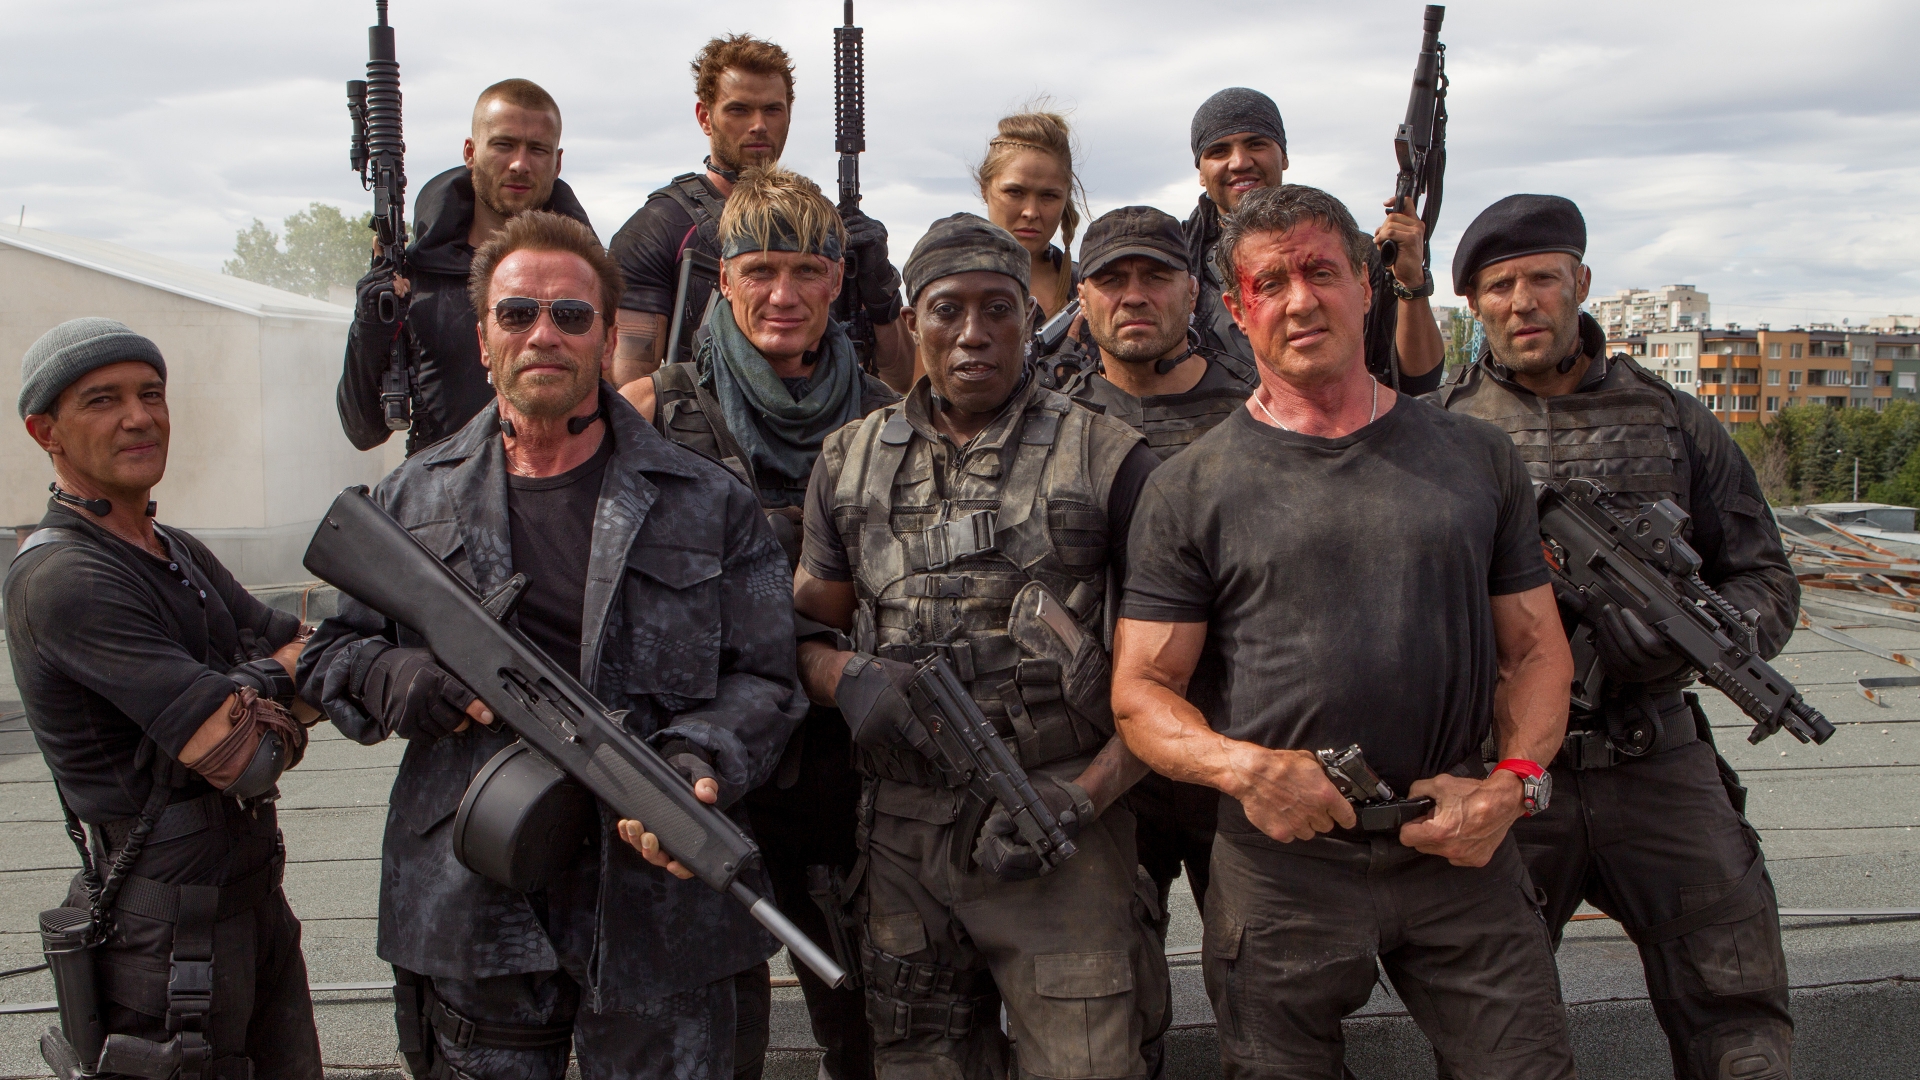 The Expendables 3 Cast for 1920 x 1080 HDTV 1080p resolution